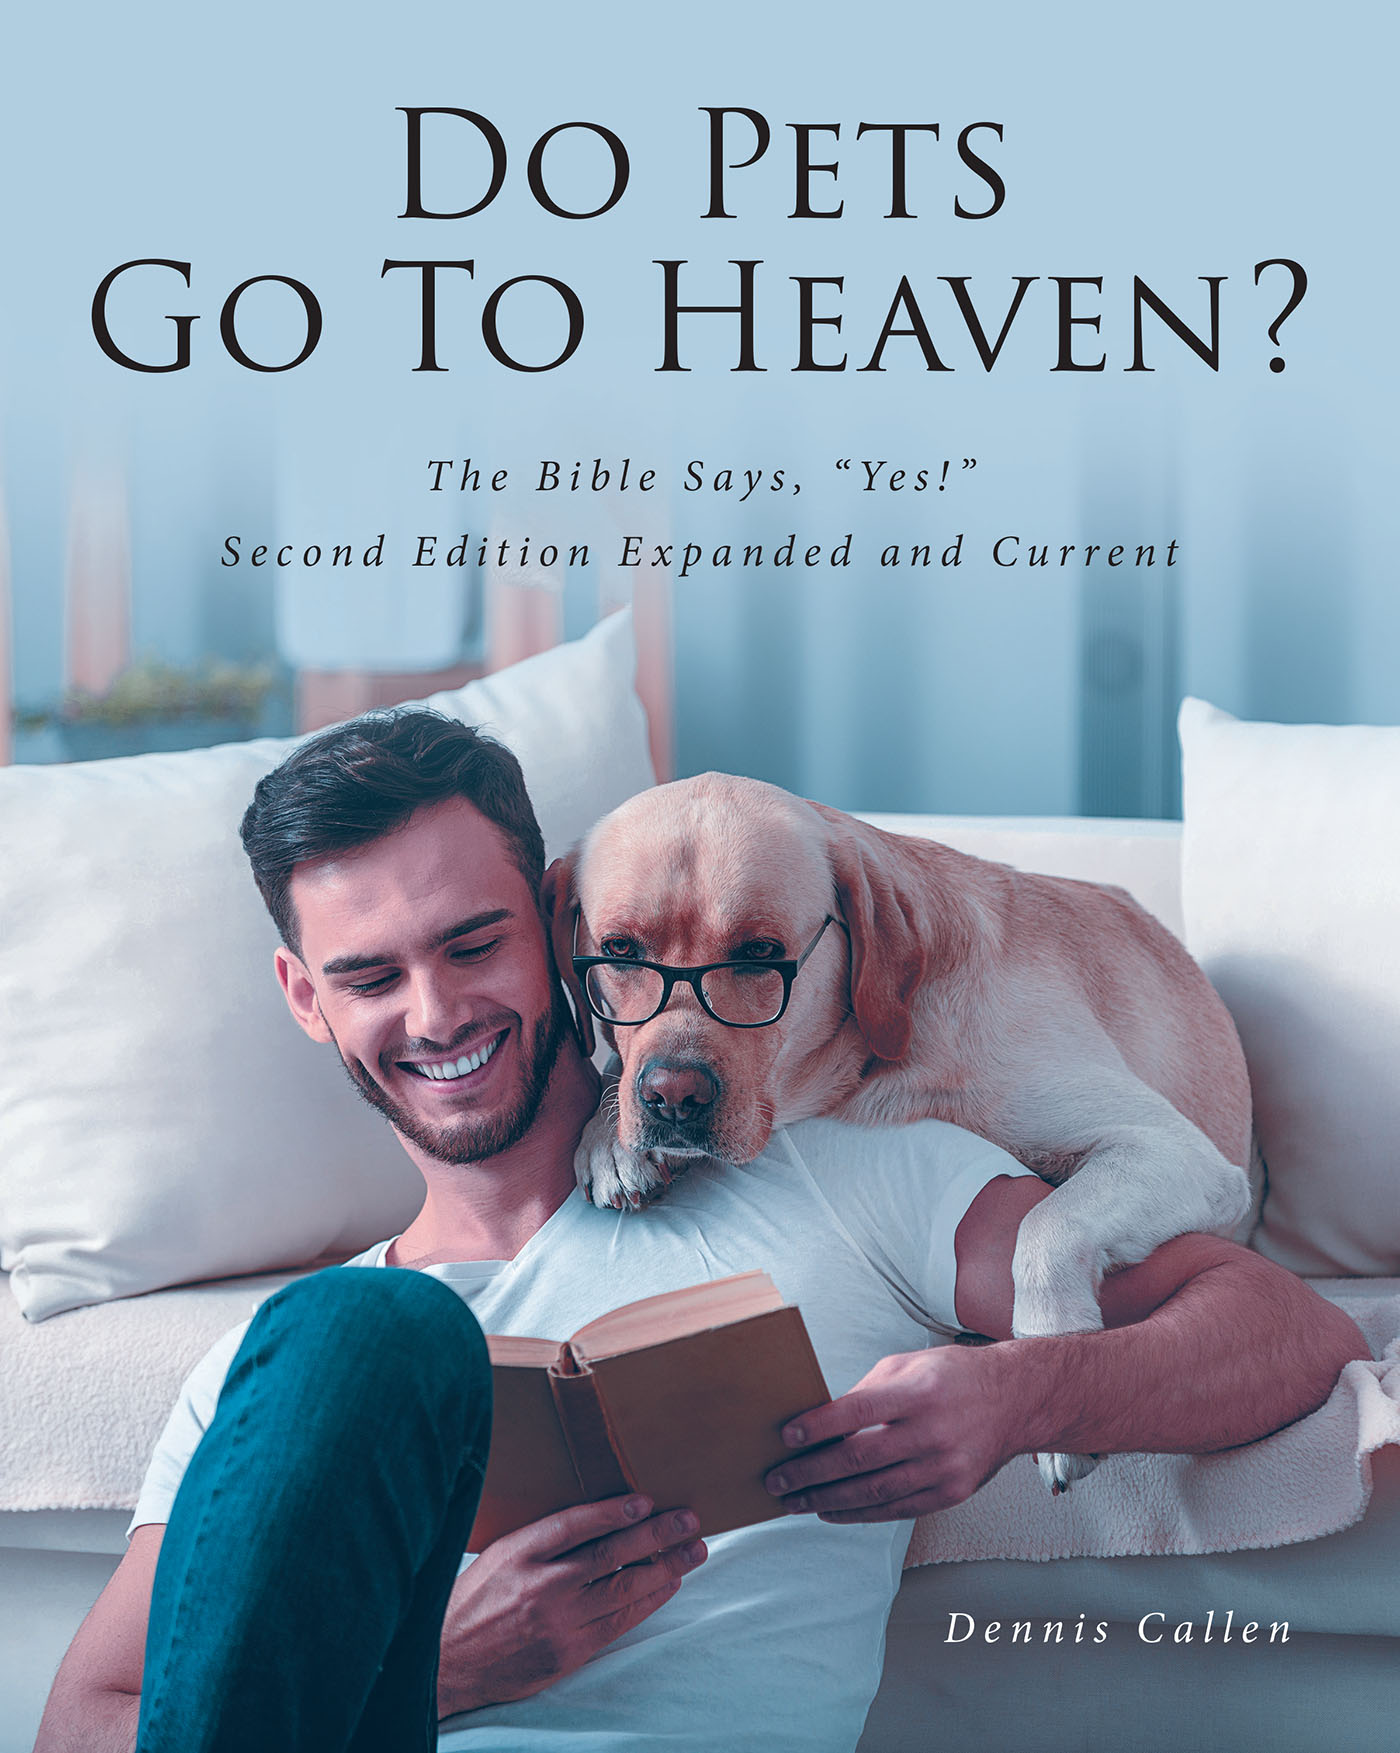 Author Dennis Callen’s New Book “Do Pets Go To Heaven? The Bible Says, ‘Yes!’ Second Edition Expanded and Current” Shares Good News for Pet Owners